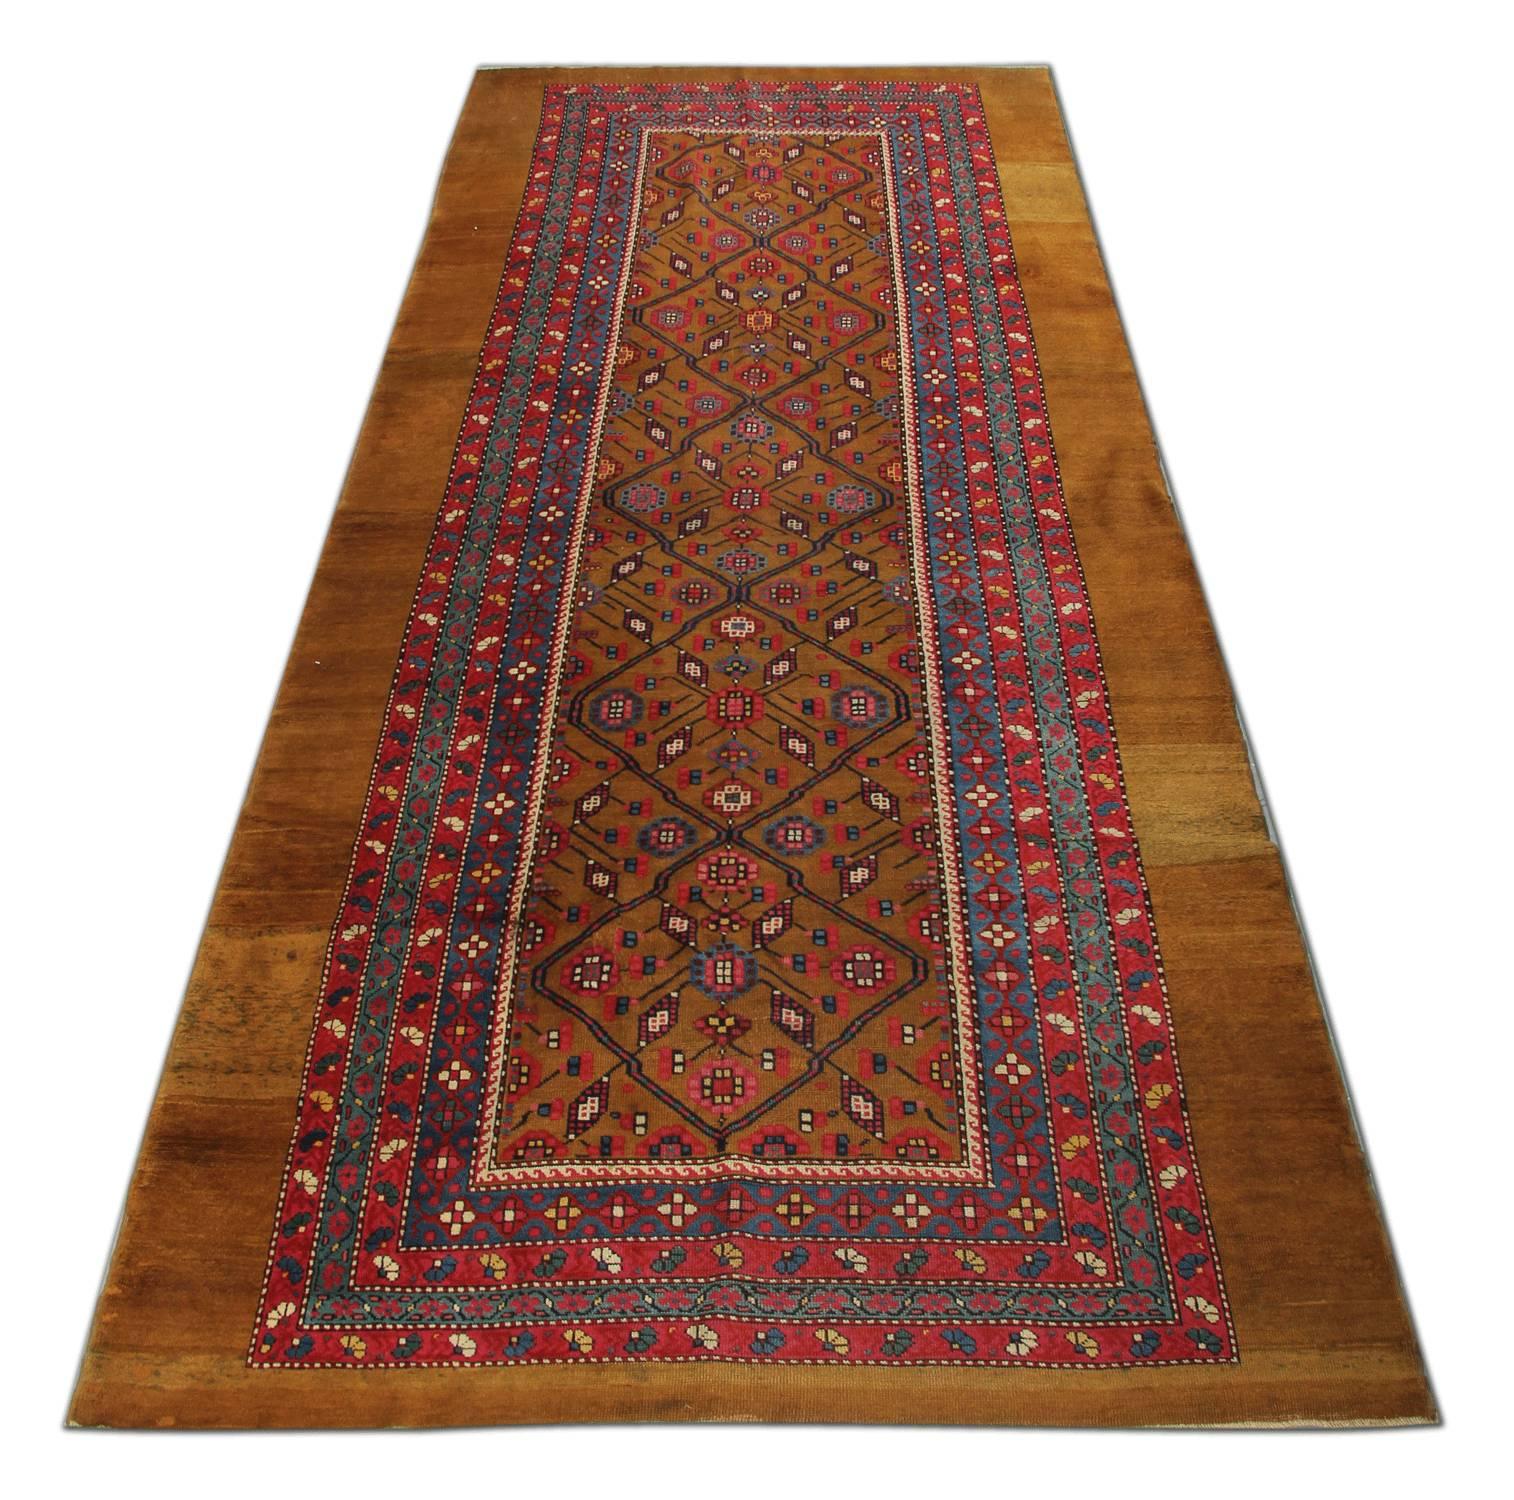 These handmade carpet runner oriental rugs are a rare find because of their color combination. This is a beautiful old camel ground woven rug in near-mint condition. Antique rugs are made with a full pile everywhere, finely woven and full of charm.